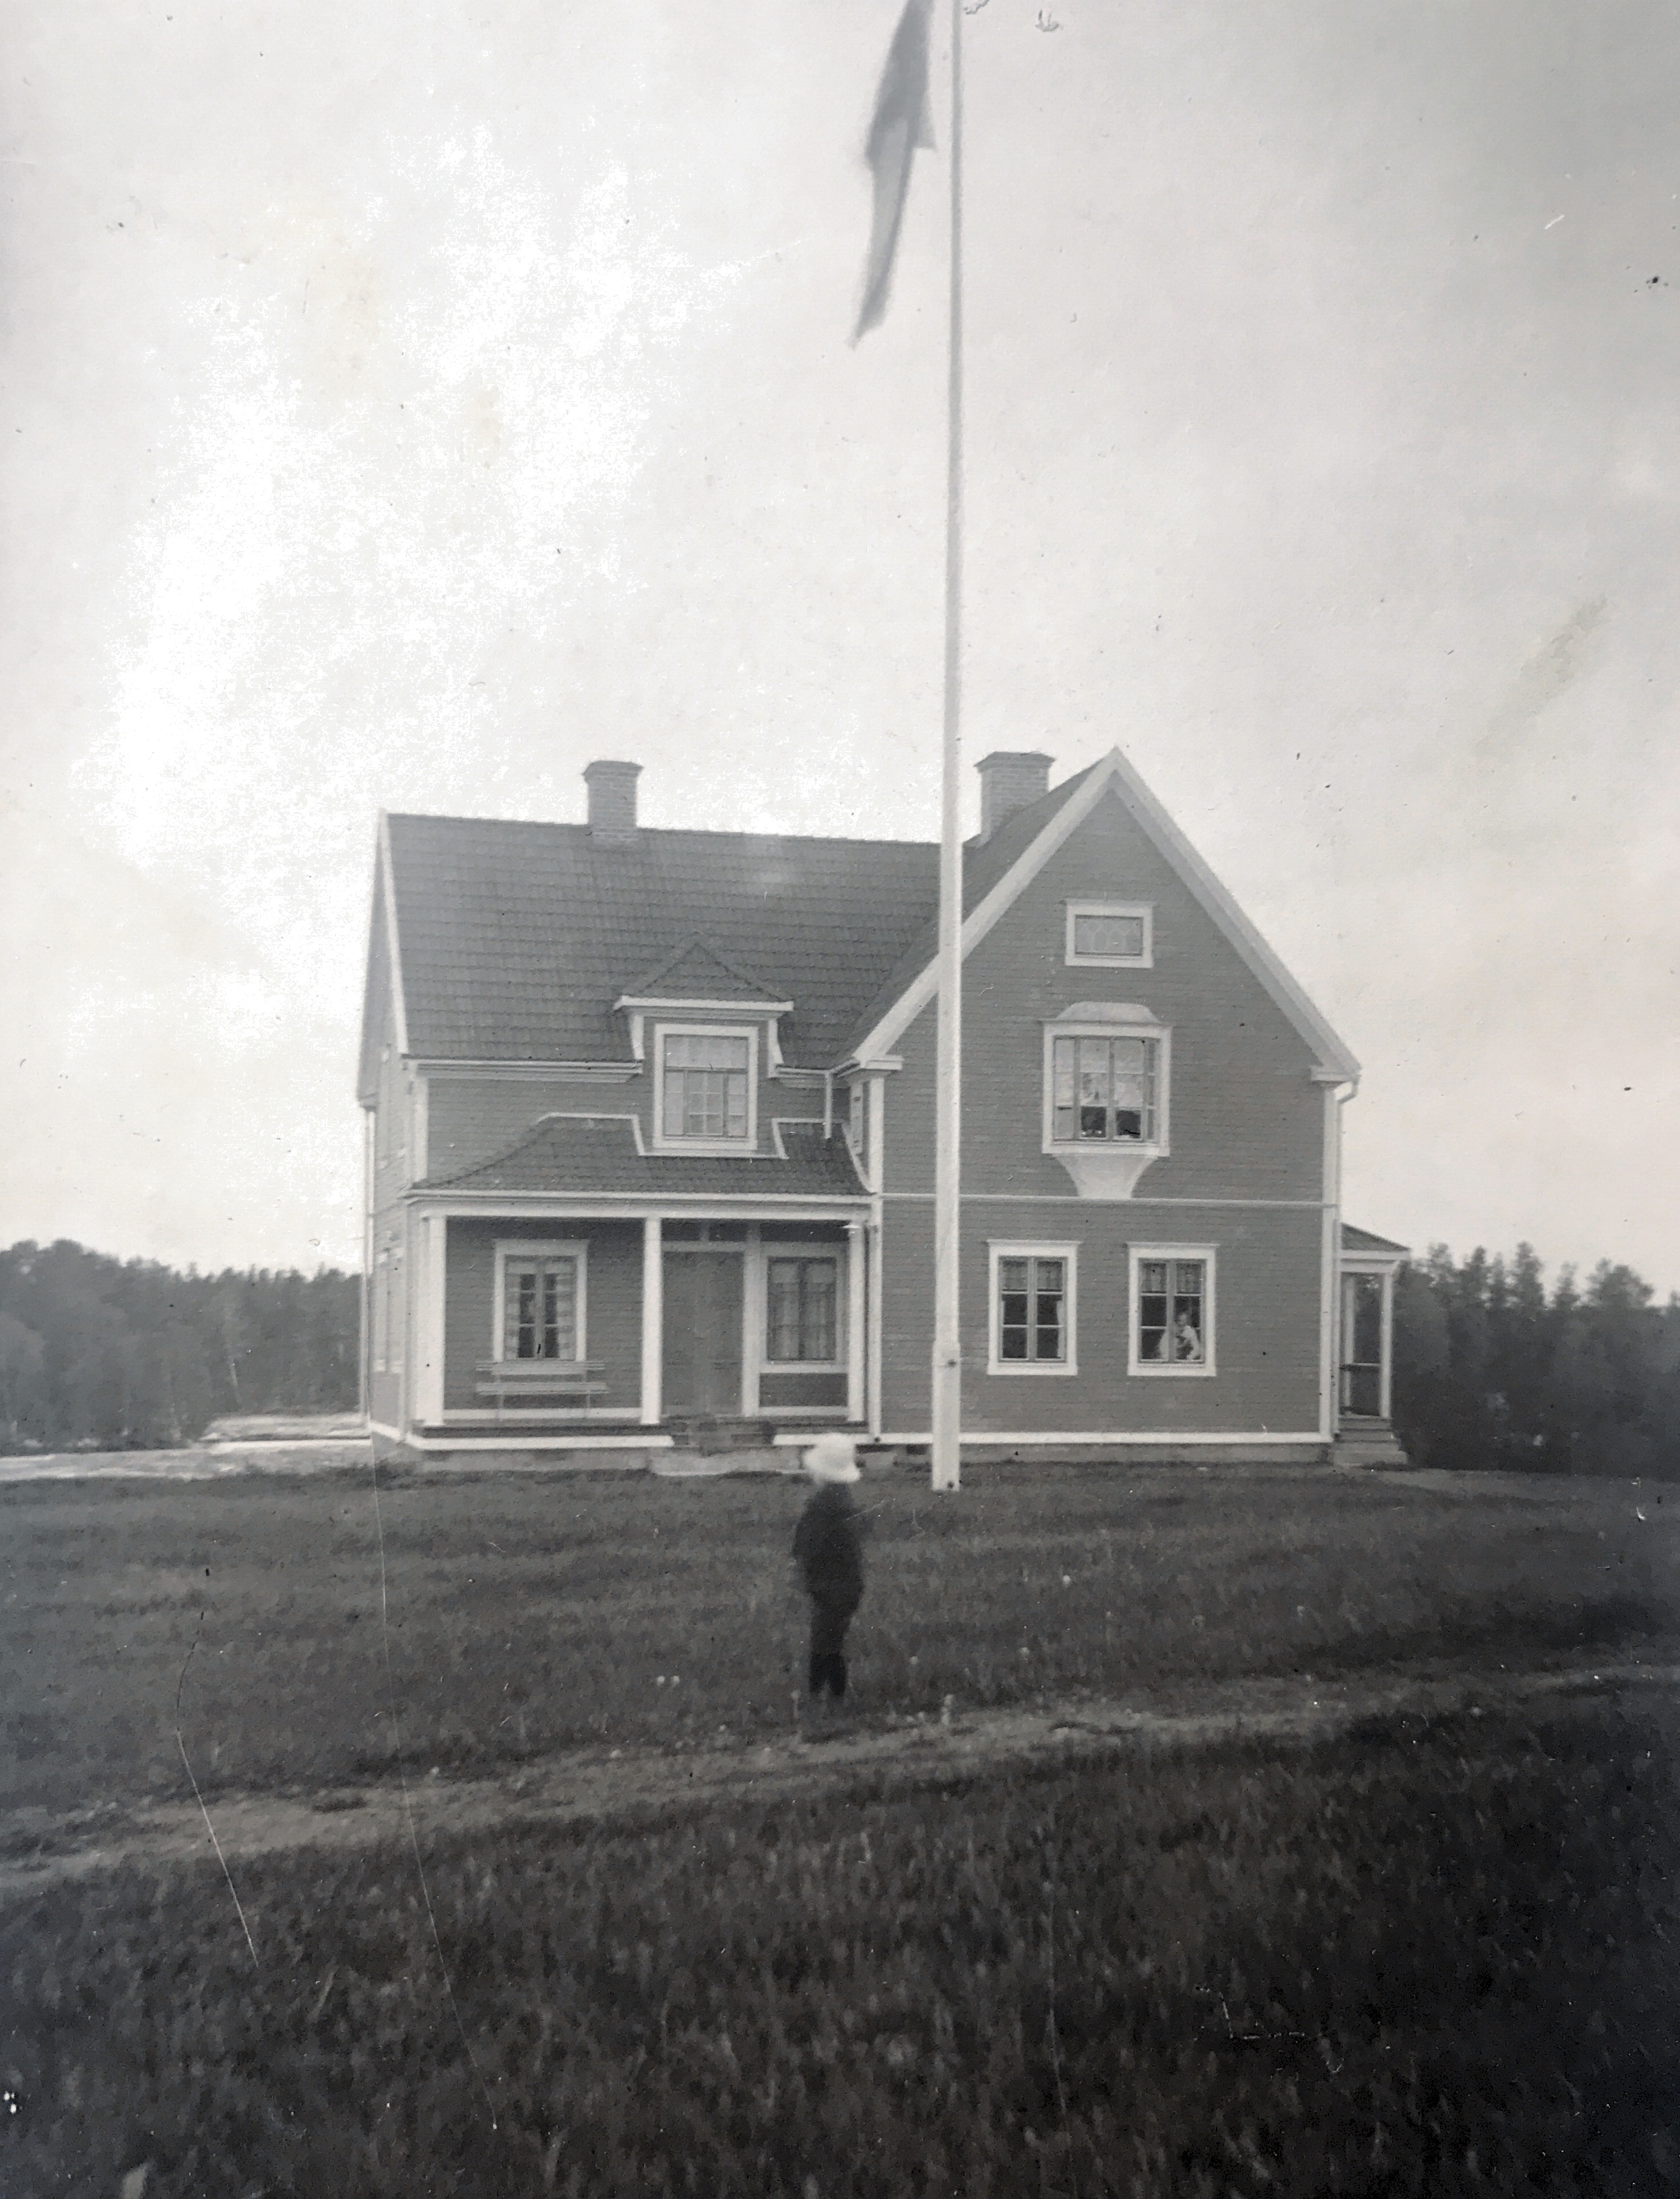 The 1st house my grandfather built after returning to Sweden in 1907. Then in 1920 he built a 2nd house just like it, only bigger, in nearby Krokom village and moved there with his family.